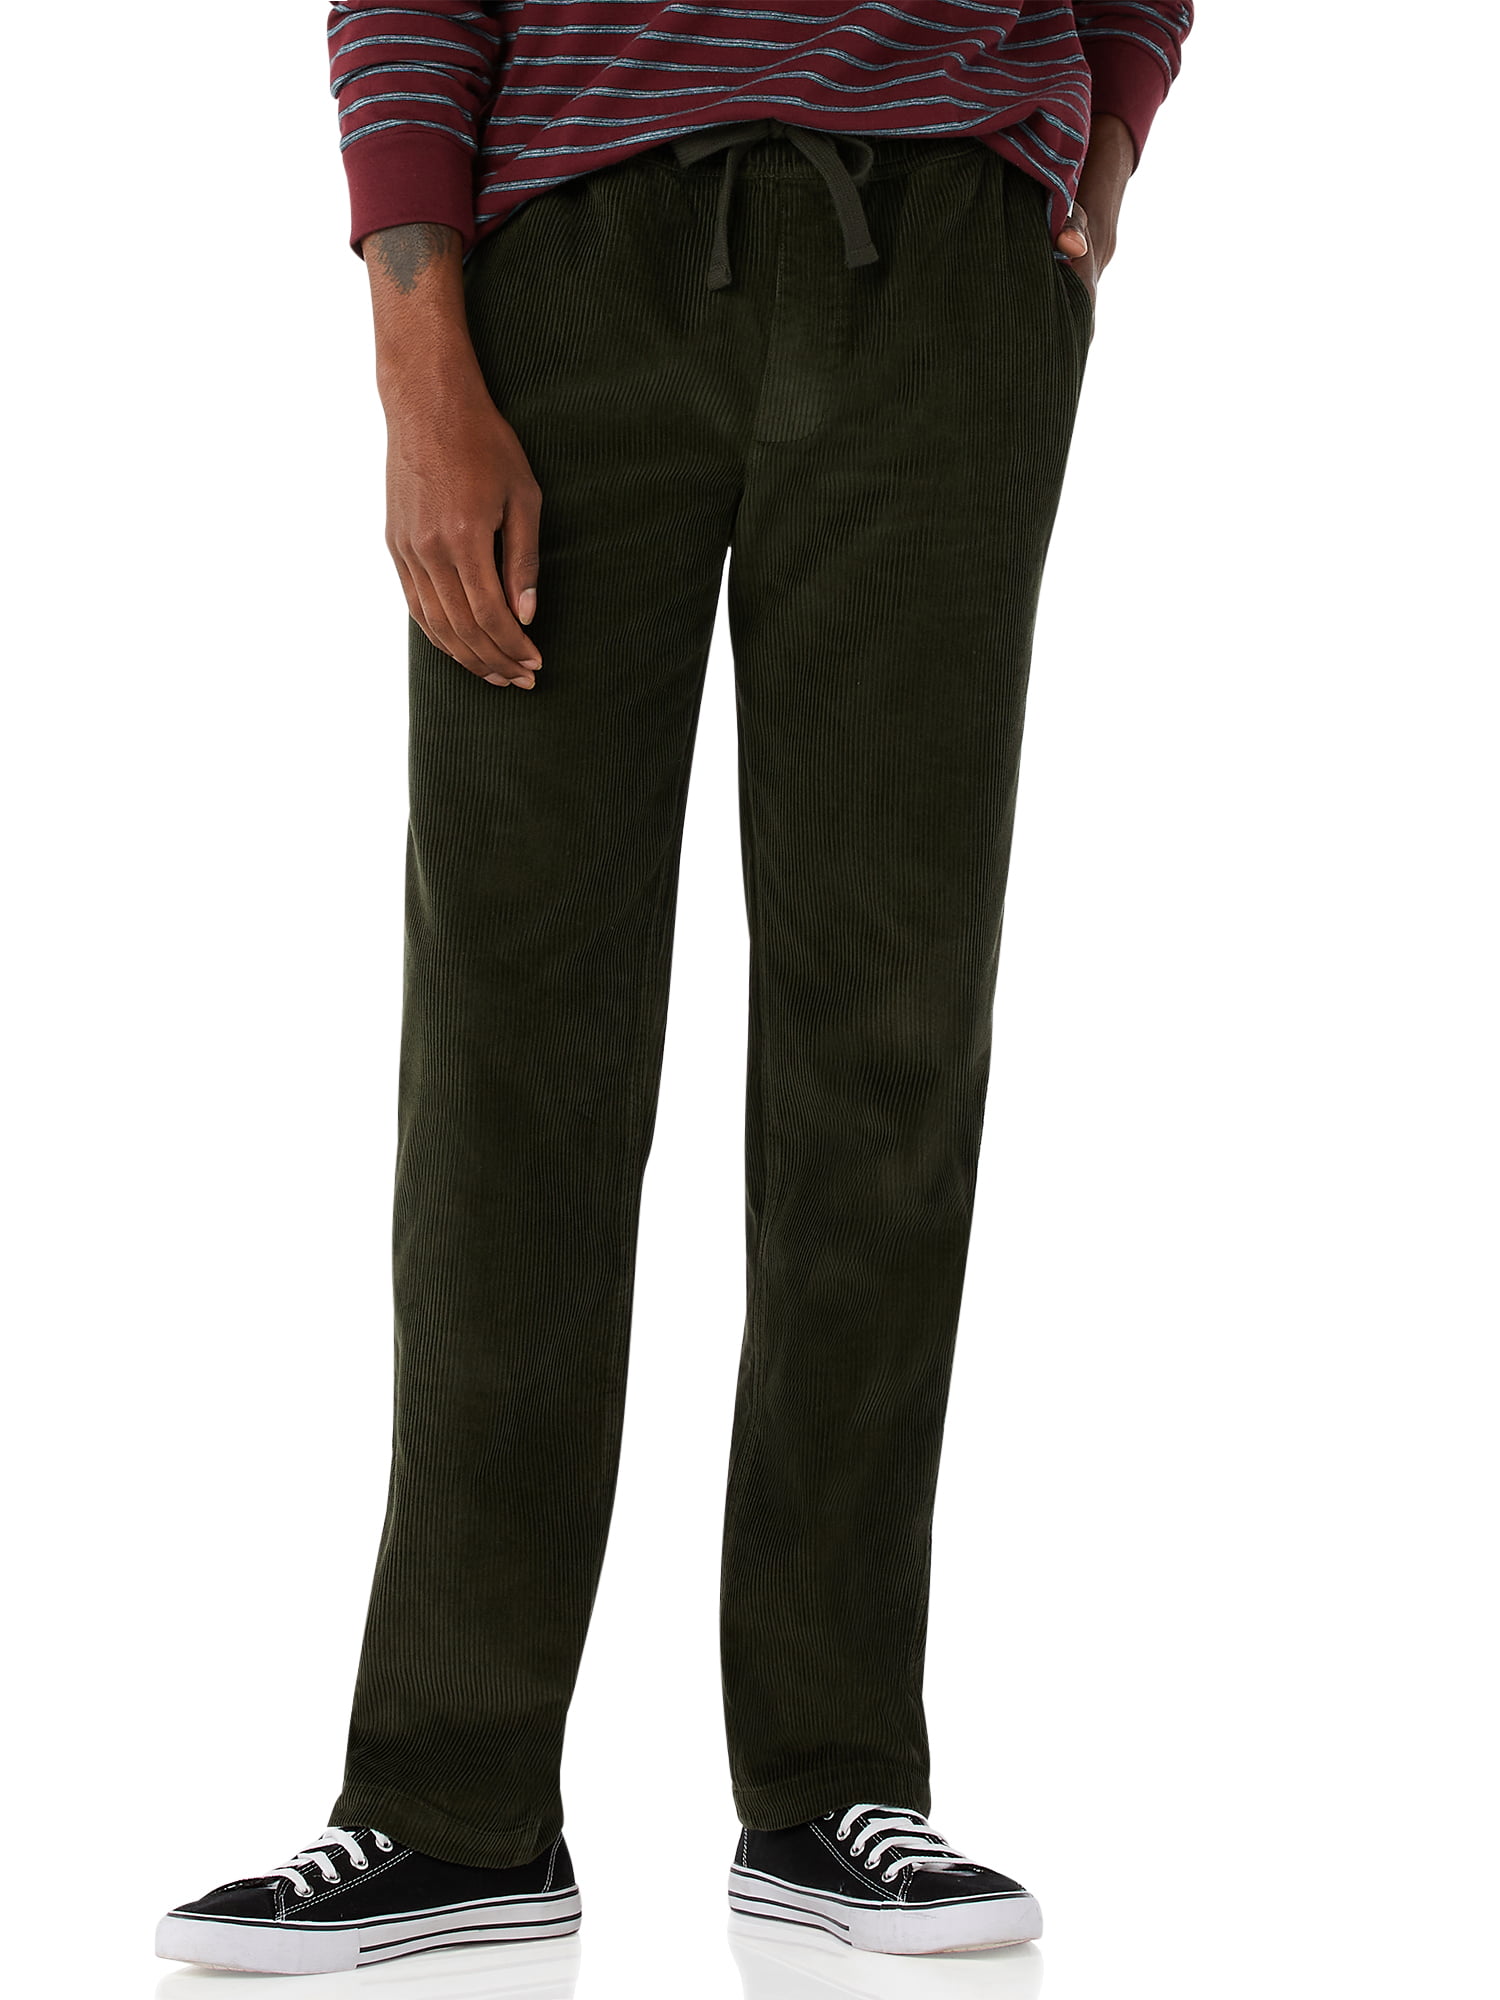 Free Assembly - Free Assembly Men's Corduroy Utility Pants with E-waist ...